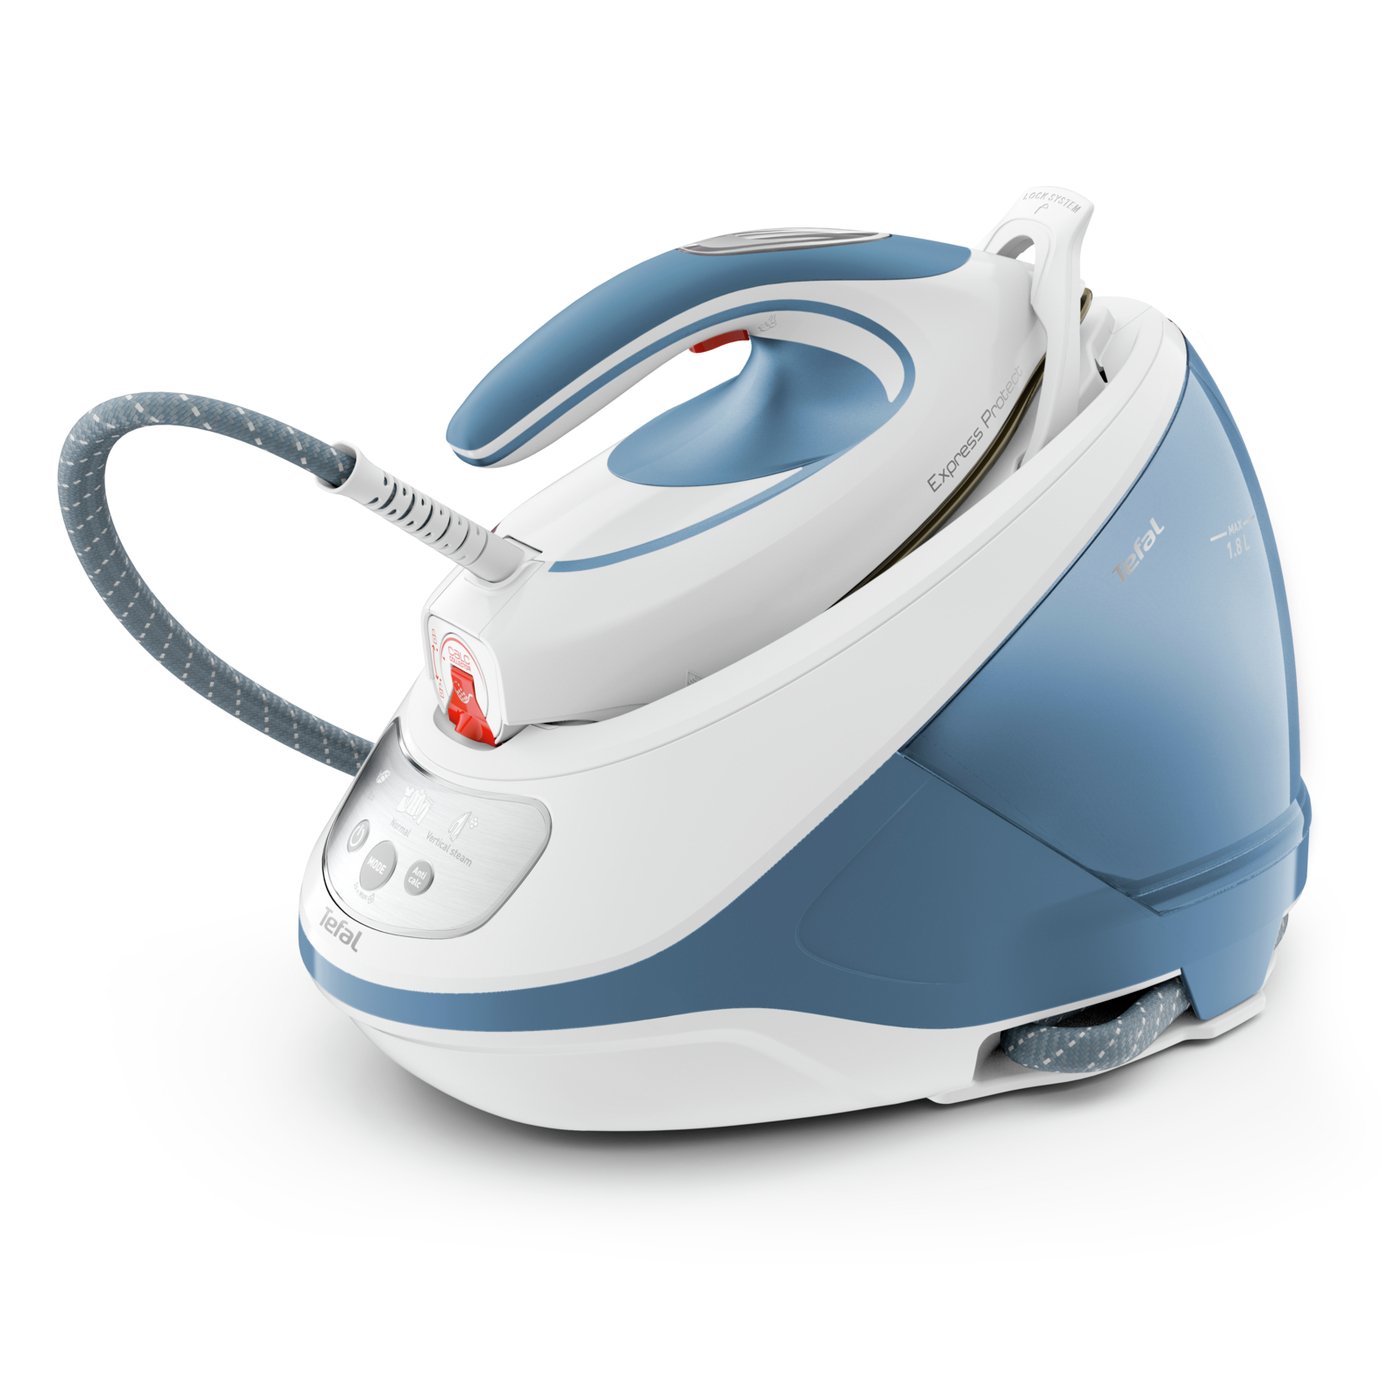 Tefal SV9202 Express Protect Steam Generator Iron